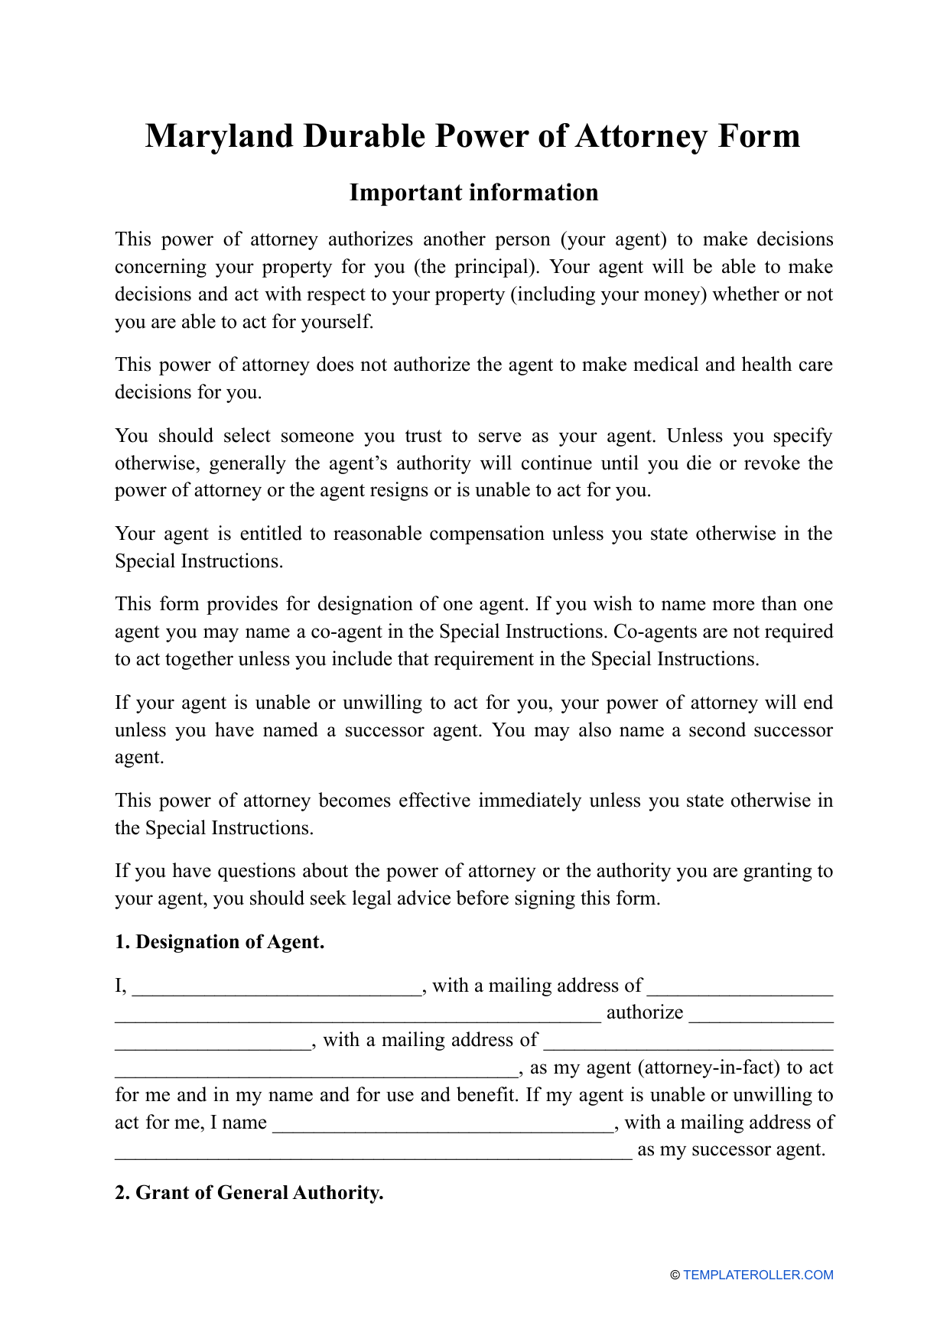 Durable Power of Attorney Form - Maryland, Page 1